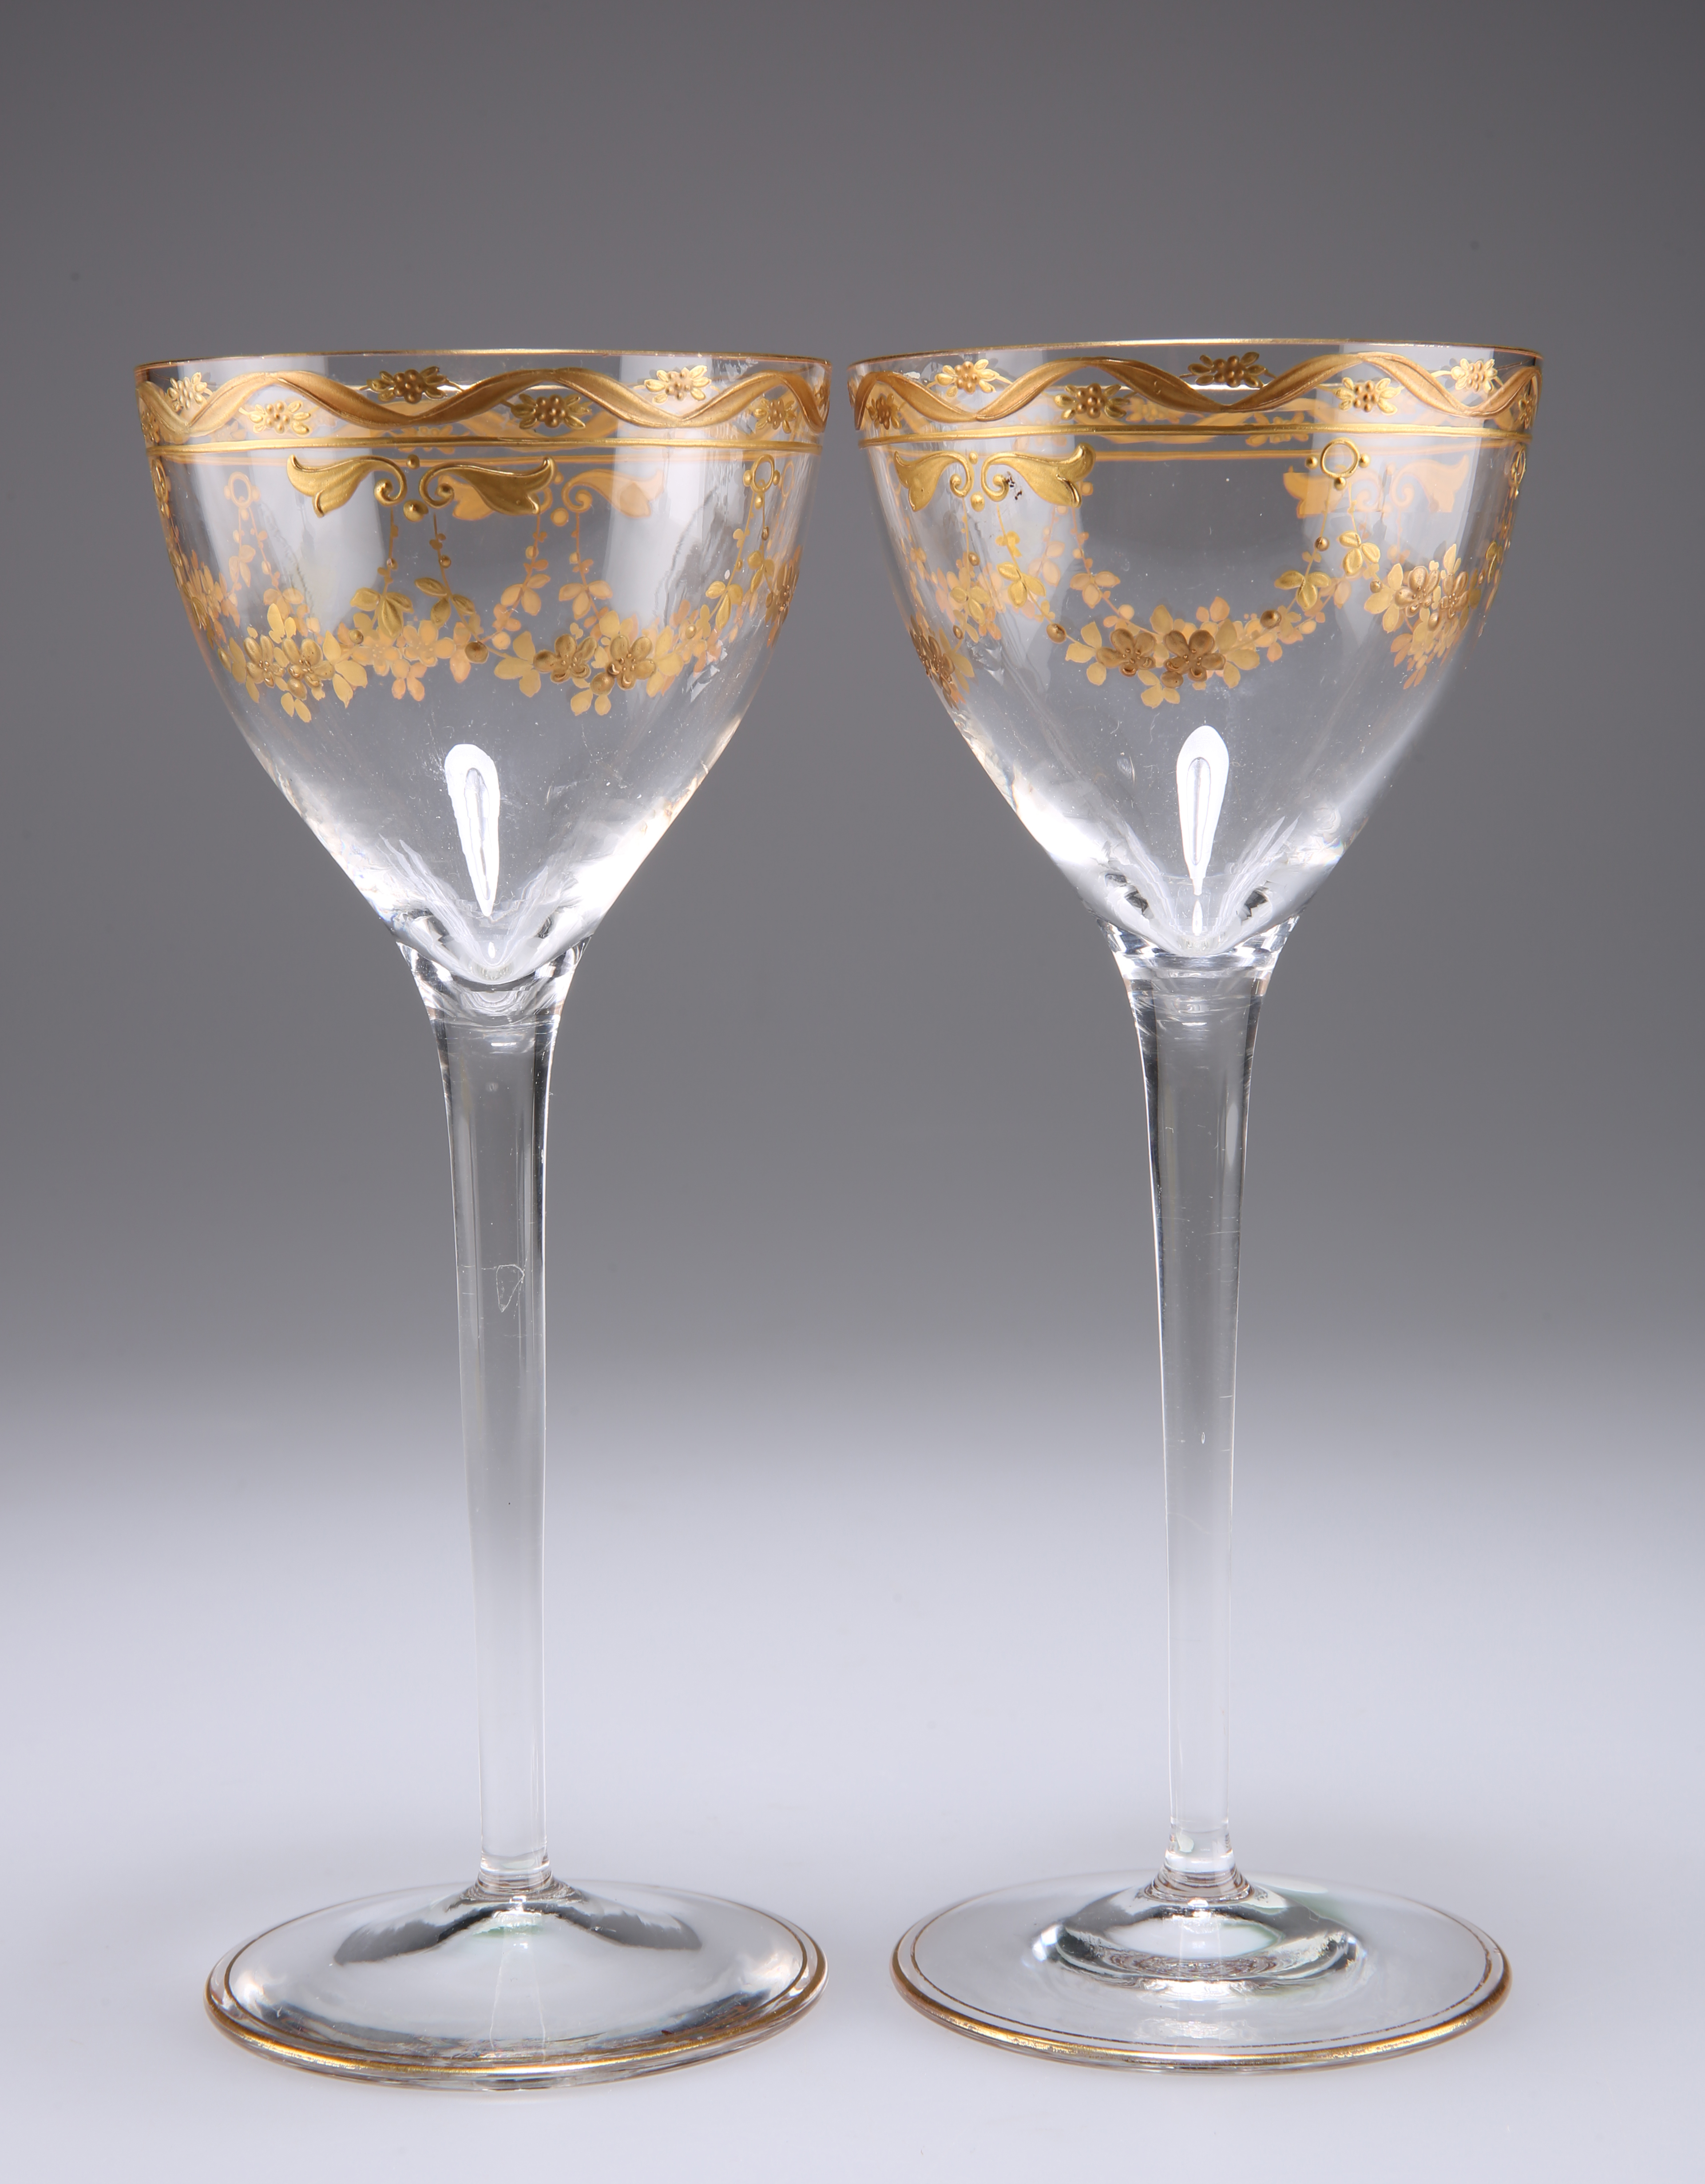 A PAIR OF CONTINENTAL GILDED WINE GLASSES, CIRCA 1895